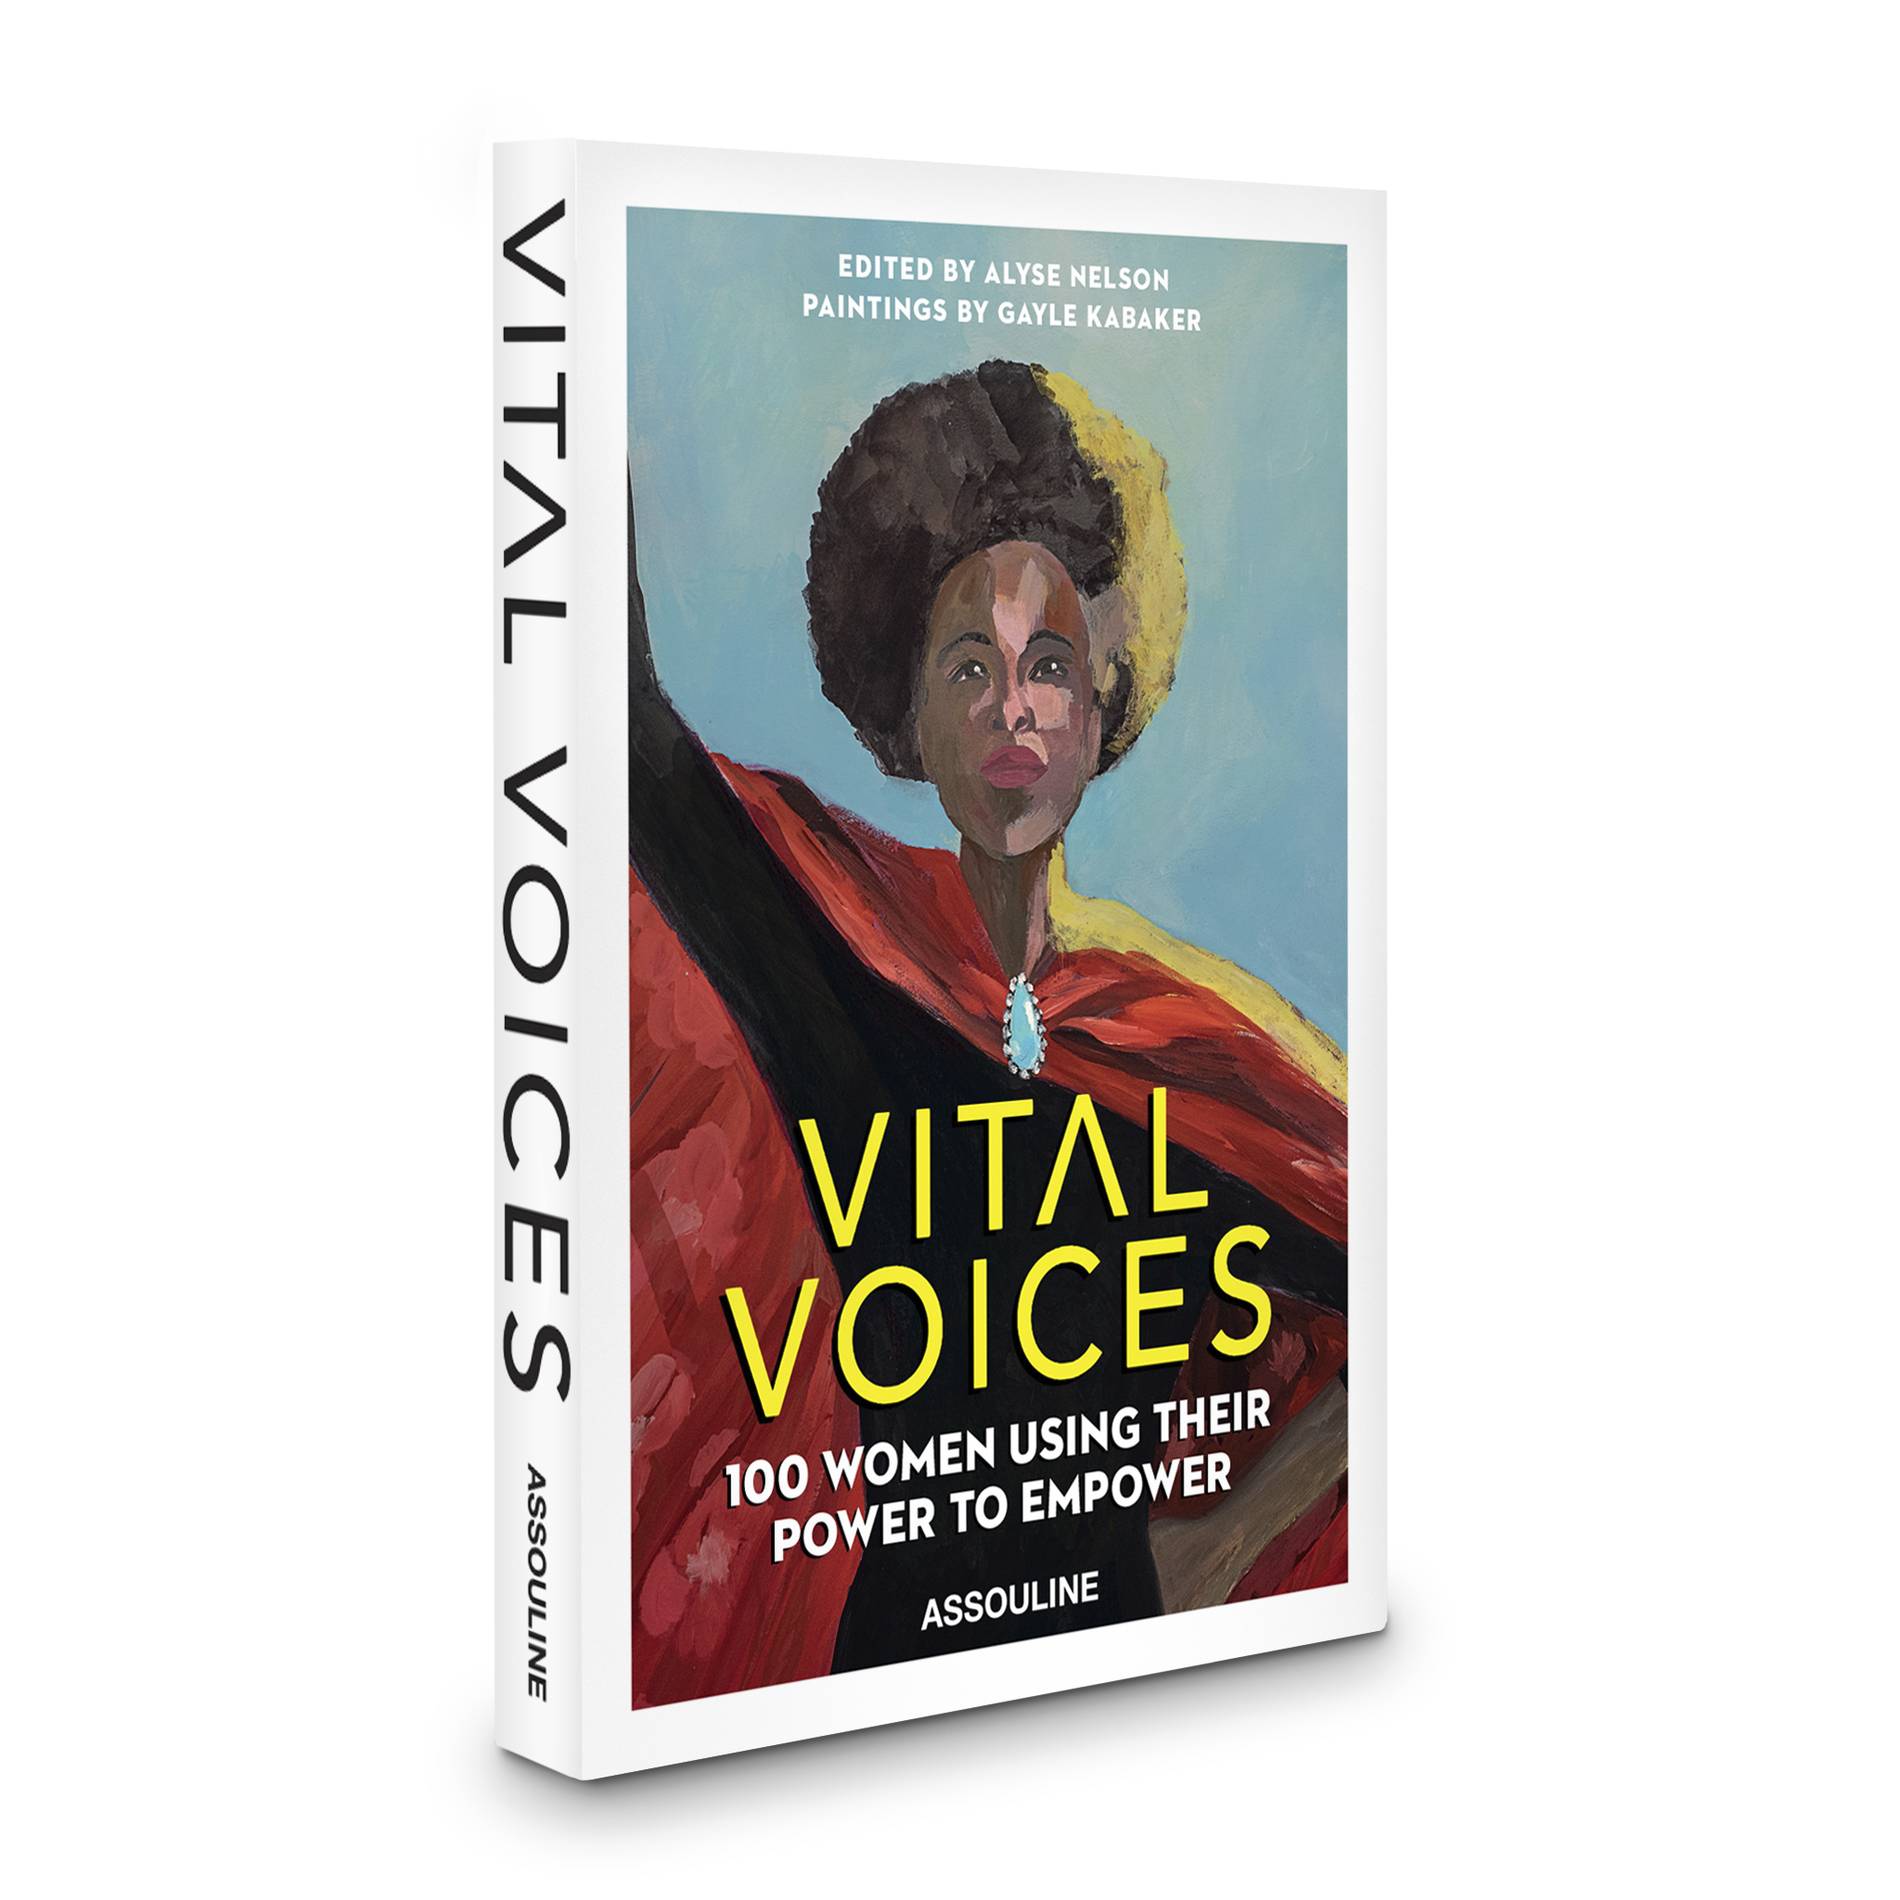 Vital Voices 100 Women Using Power to Empower